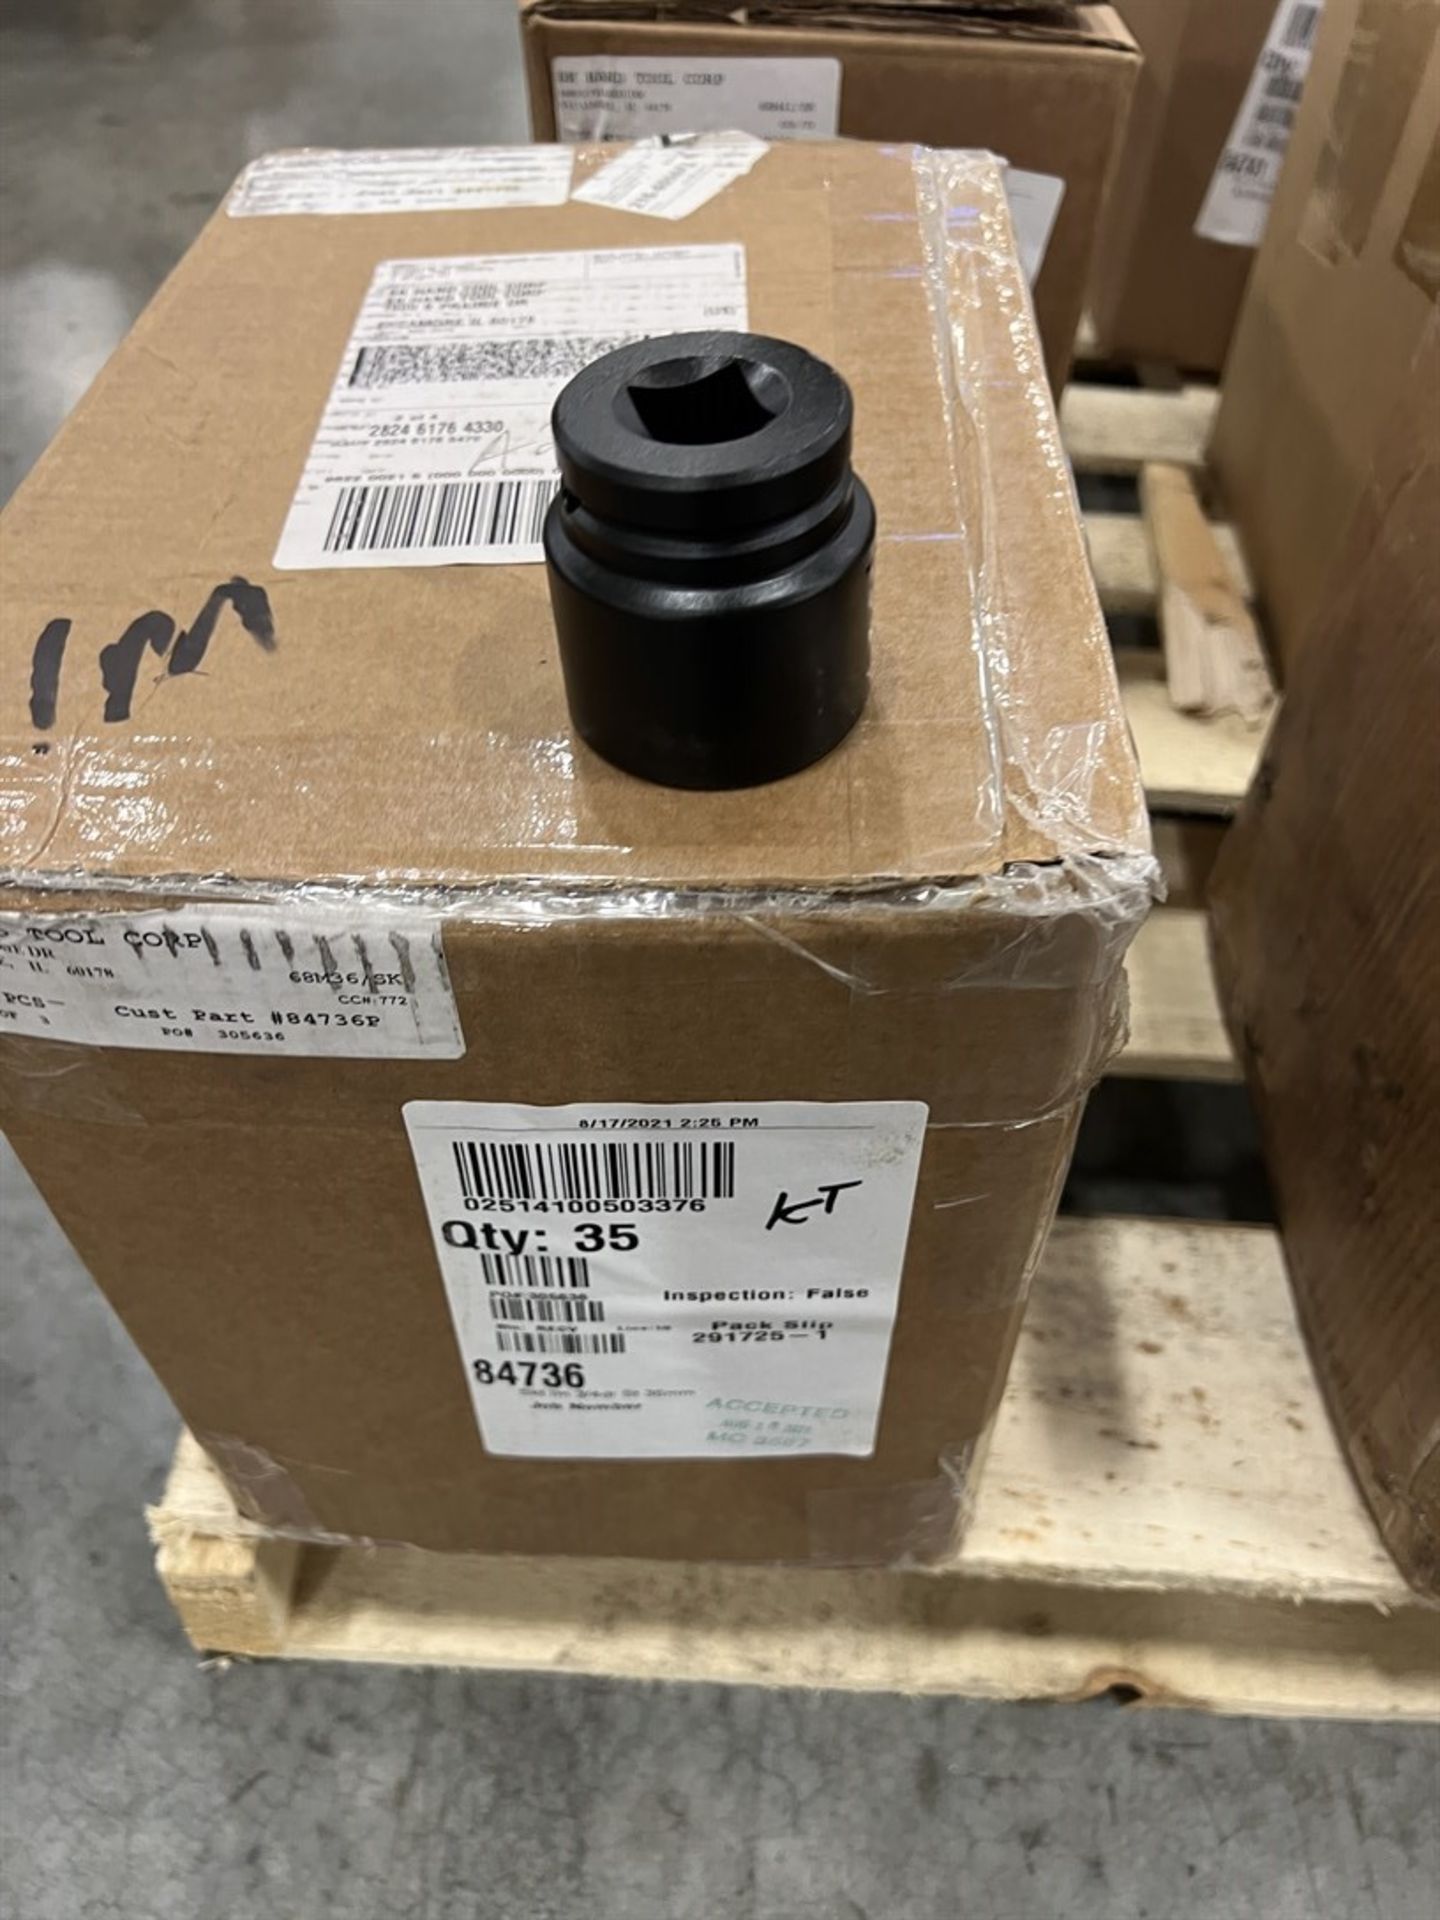 Pallet of 3/4" Drive Impact Sockets from 36-41mm - Image 2 of 5